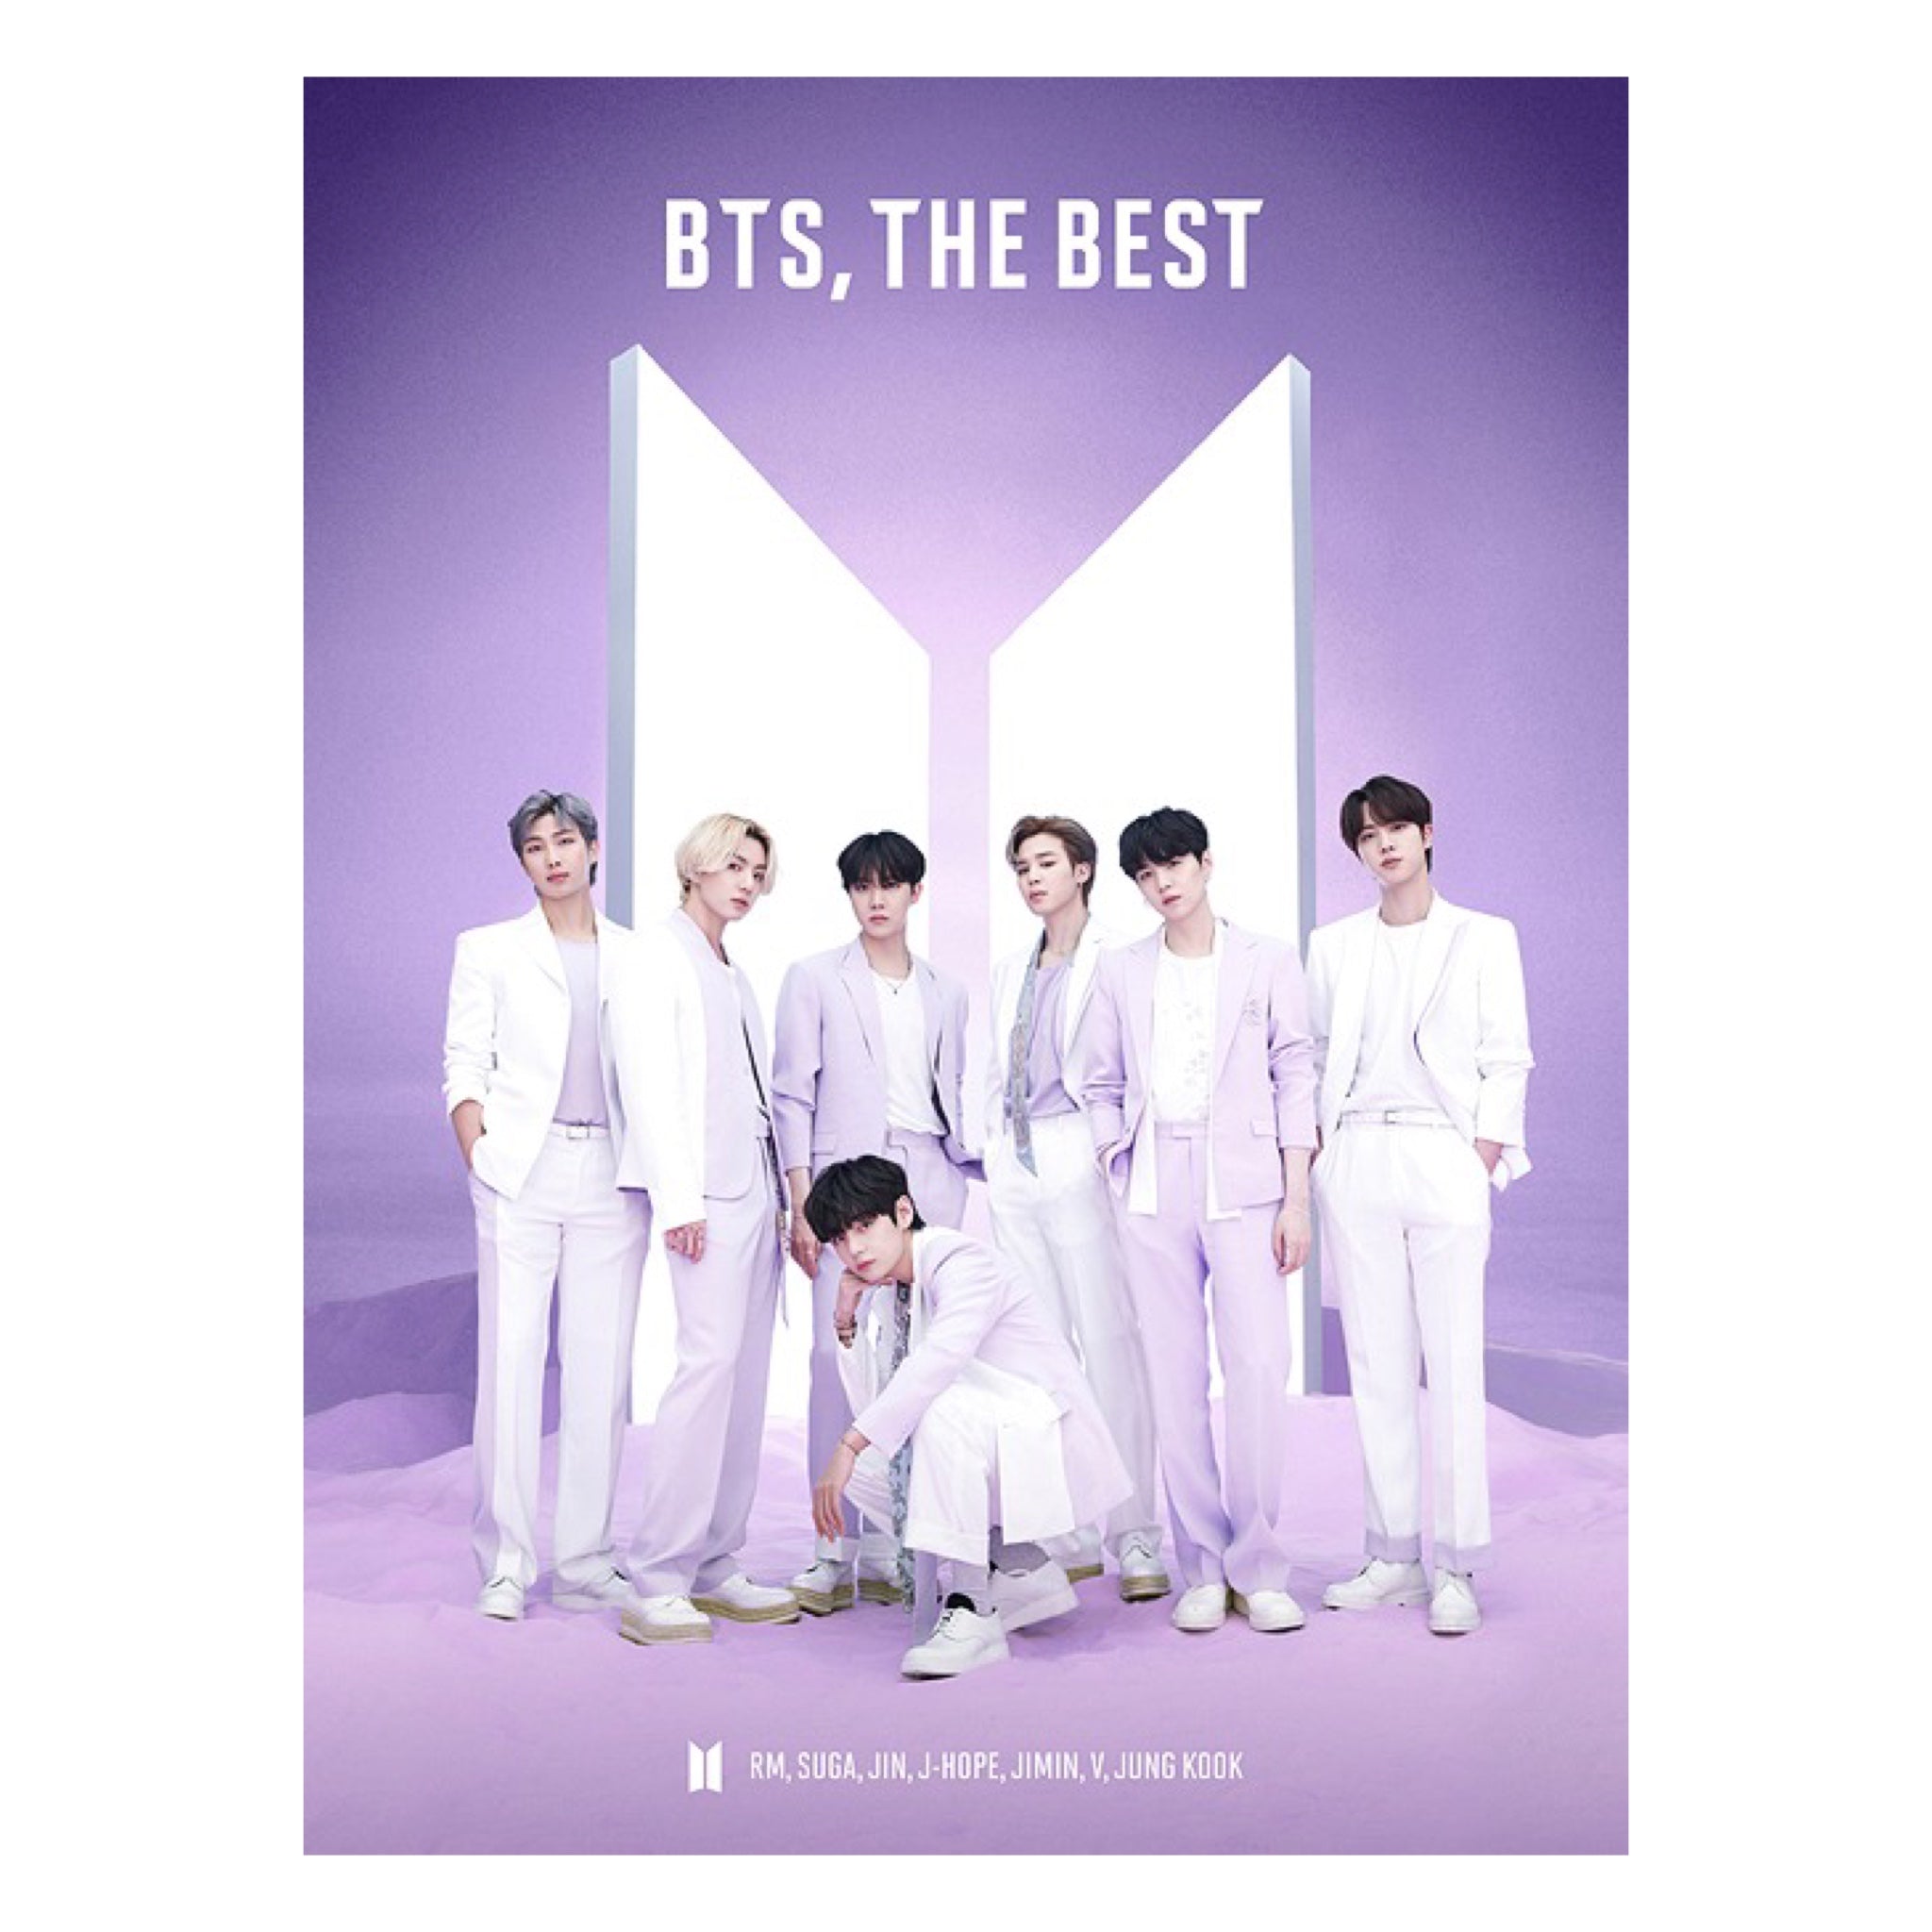 [JP] BTS - THE BEST (LIMITED EDITION / TYPE C) ✅